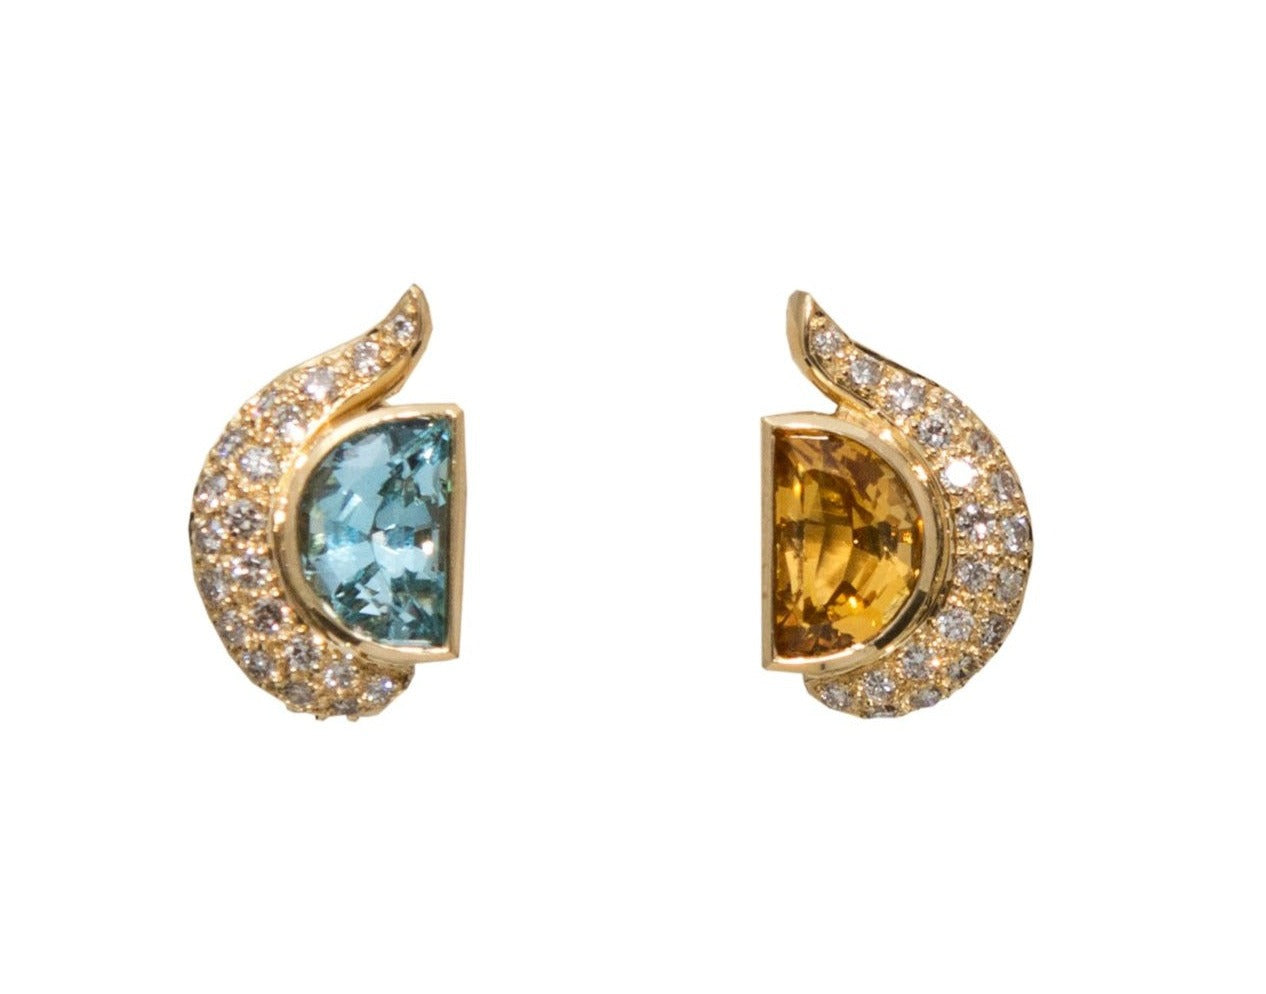 Crafted of dazzling 18k Yellow gold, this pair of earrings features 0.85 cts of diamonds, a half-moon shaped blue topaz, and a half-moon shaped citrine, all set in a 3/4" long, 1/2" wide mounting. Secured with an Omega clasp, these earrings are made in Italy.